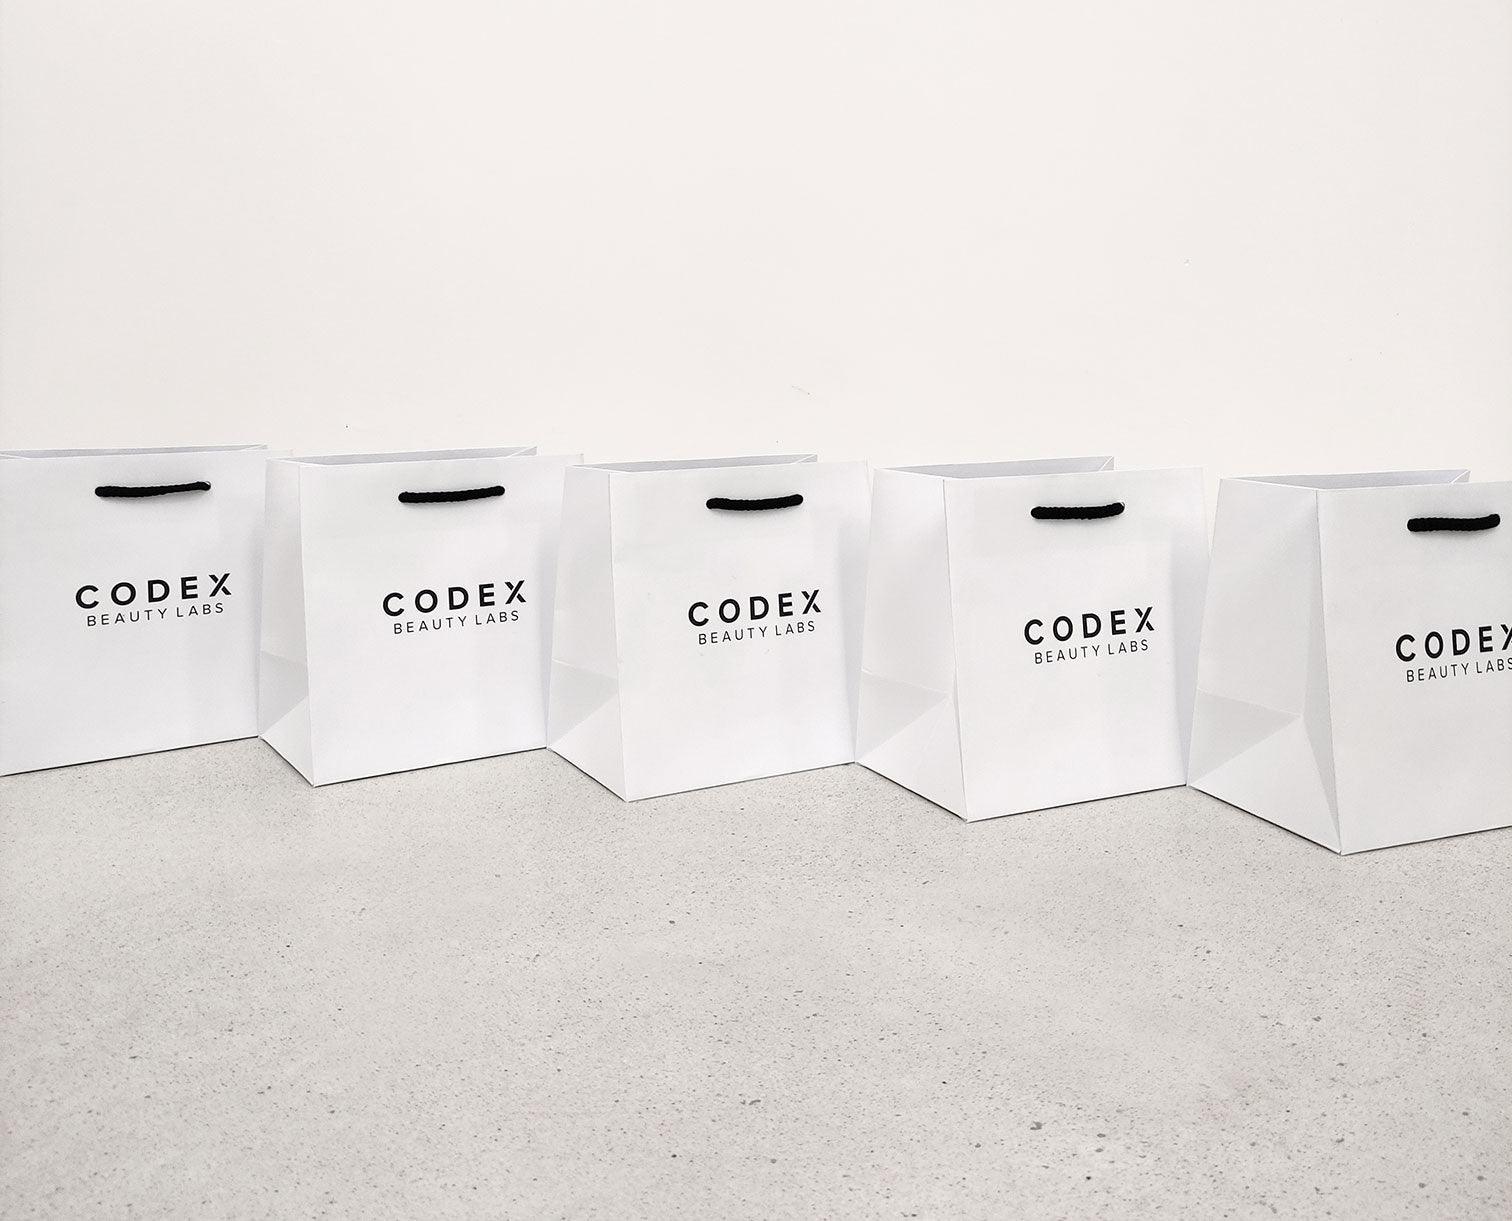 Image of Codex Beauty Labs gift bags arranged in a line on the floor 